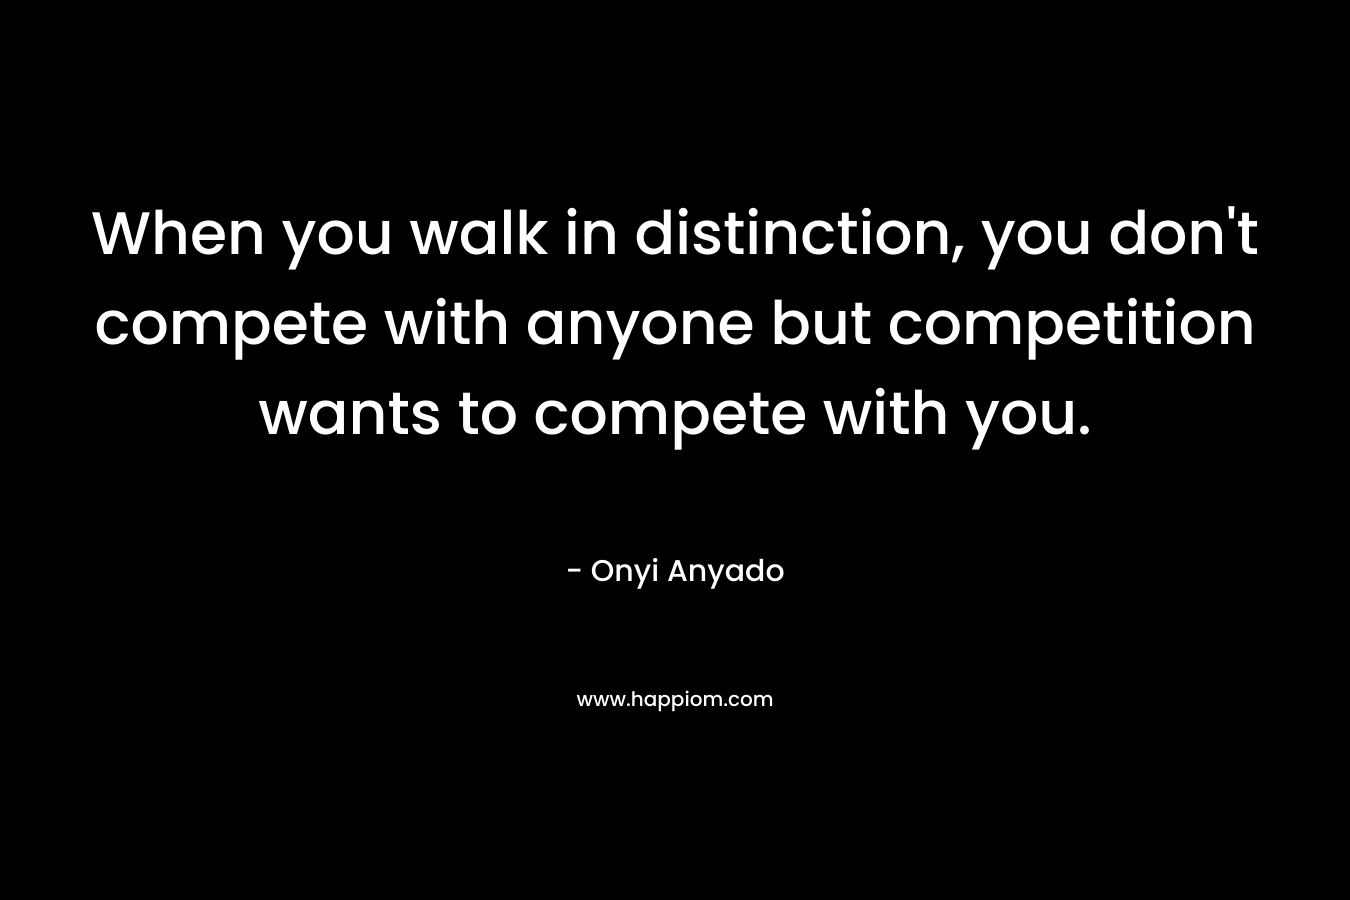 When you walk in distinction, you don’t compete with anyone but competition wants to compete with you. – Onyi Anyado